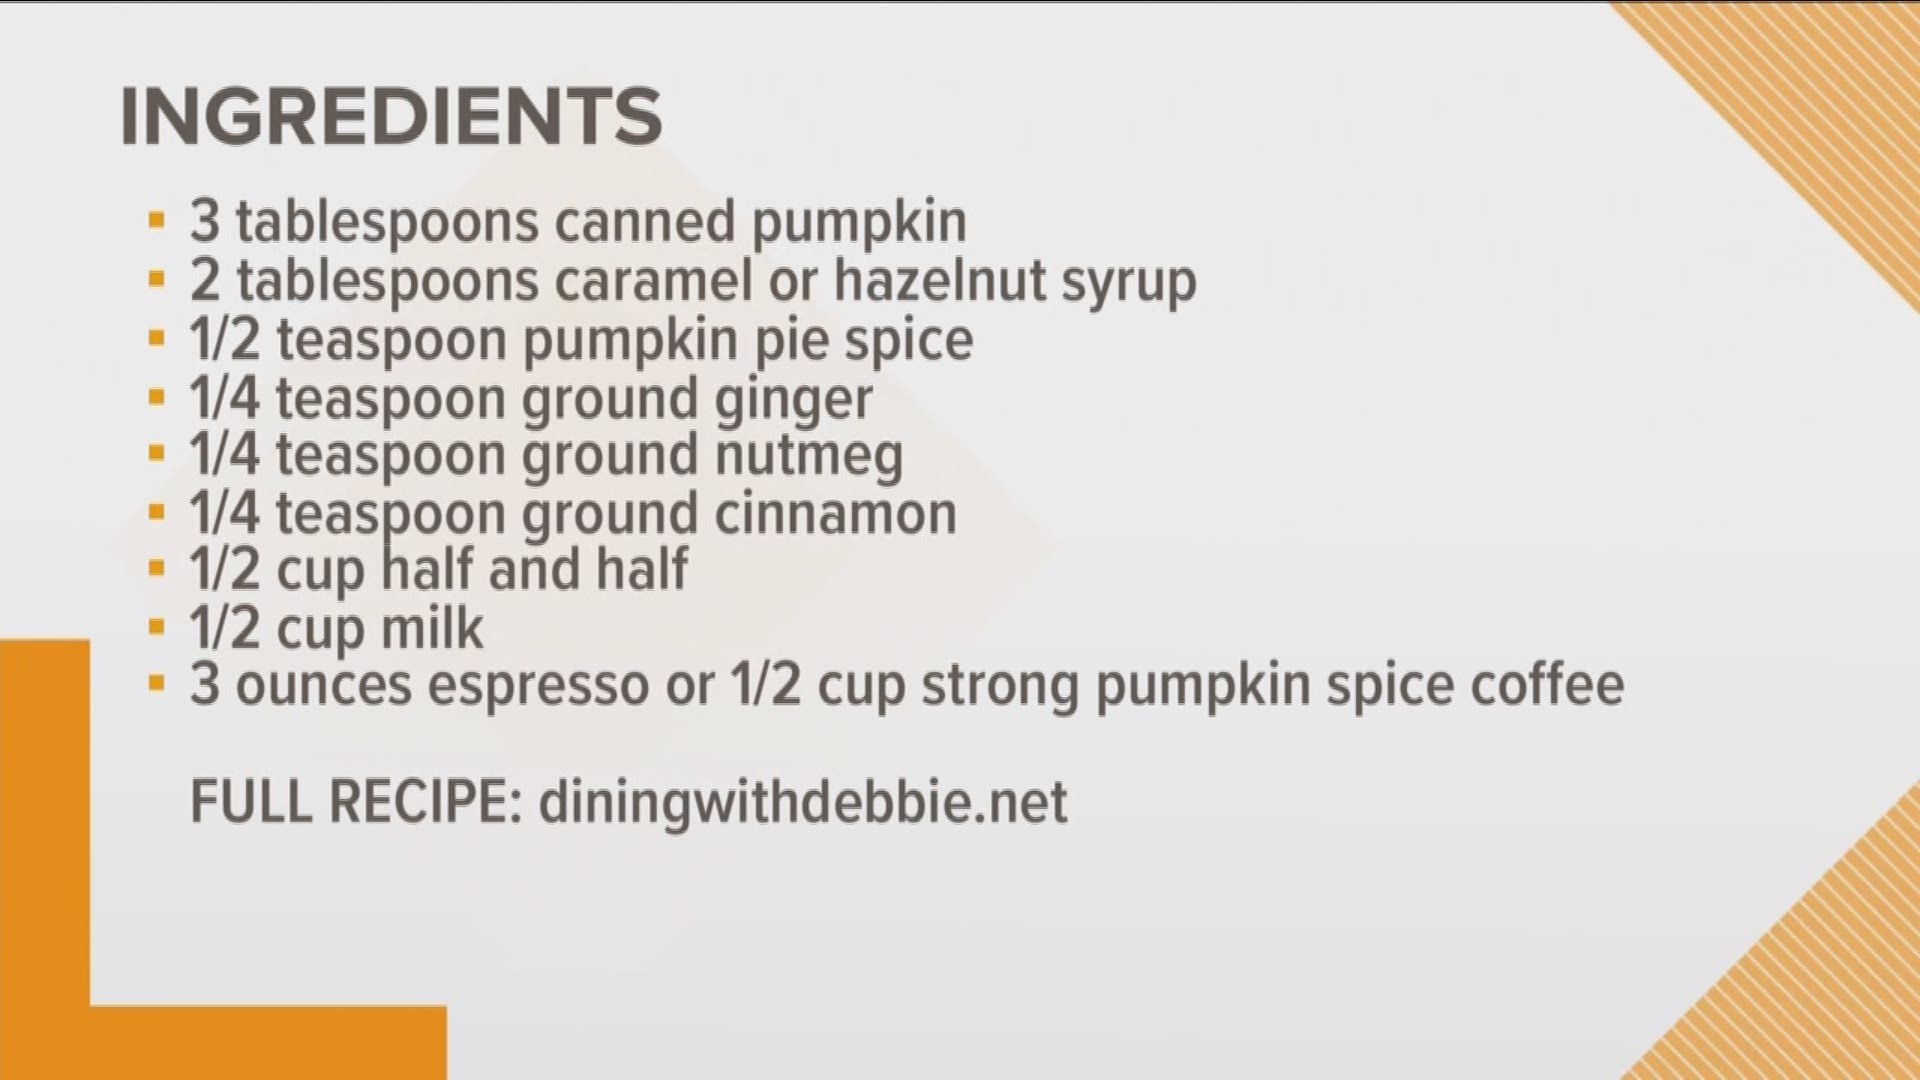 Making your own Pumpkin Spice Latte